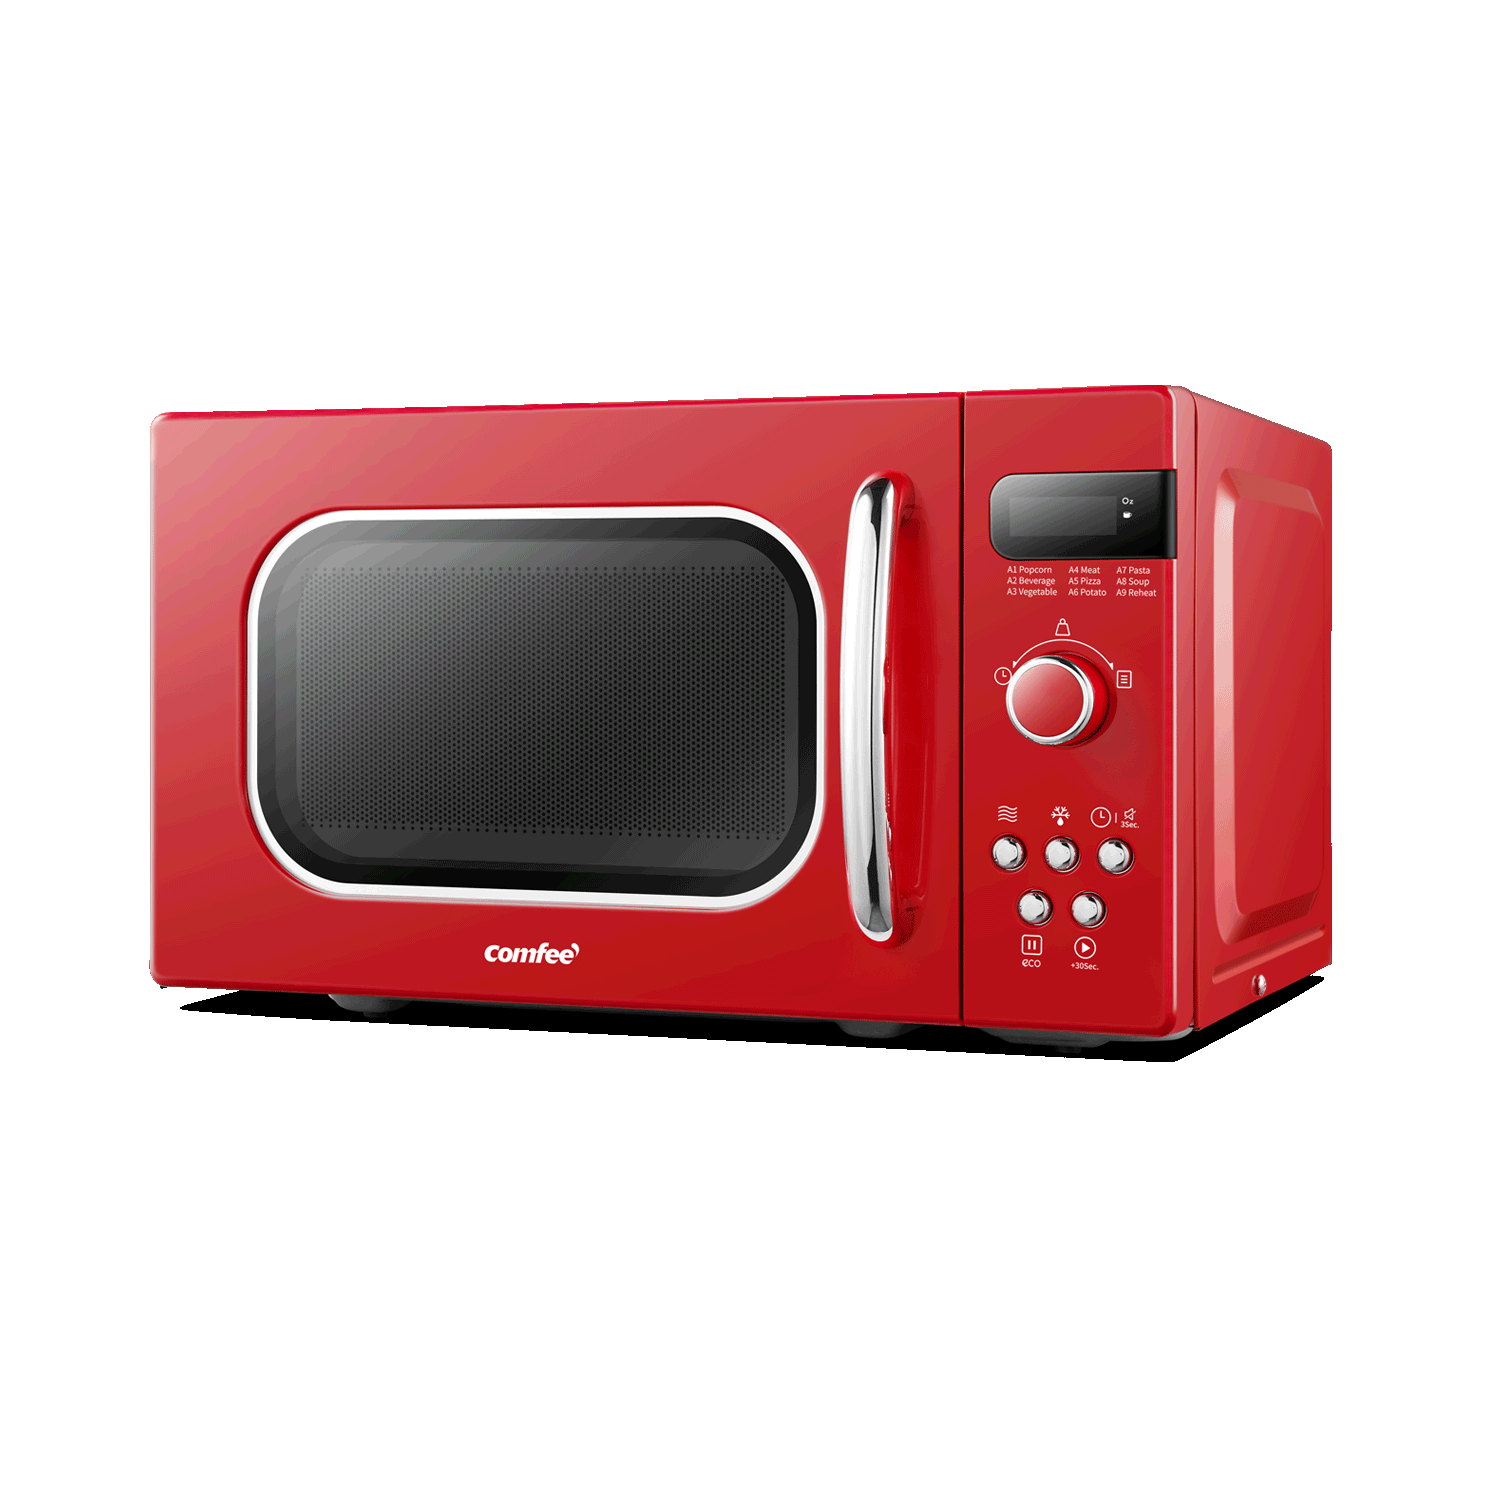 https://d1pjg4o0tbonat.cloudfront.net/content/dam/comfee-aem/global/products/kitchen-appliances/comfee-microwave-oven-passionate-red/kv2.png/jcr:content/renditions/cq5dam.compression.png